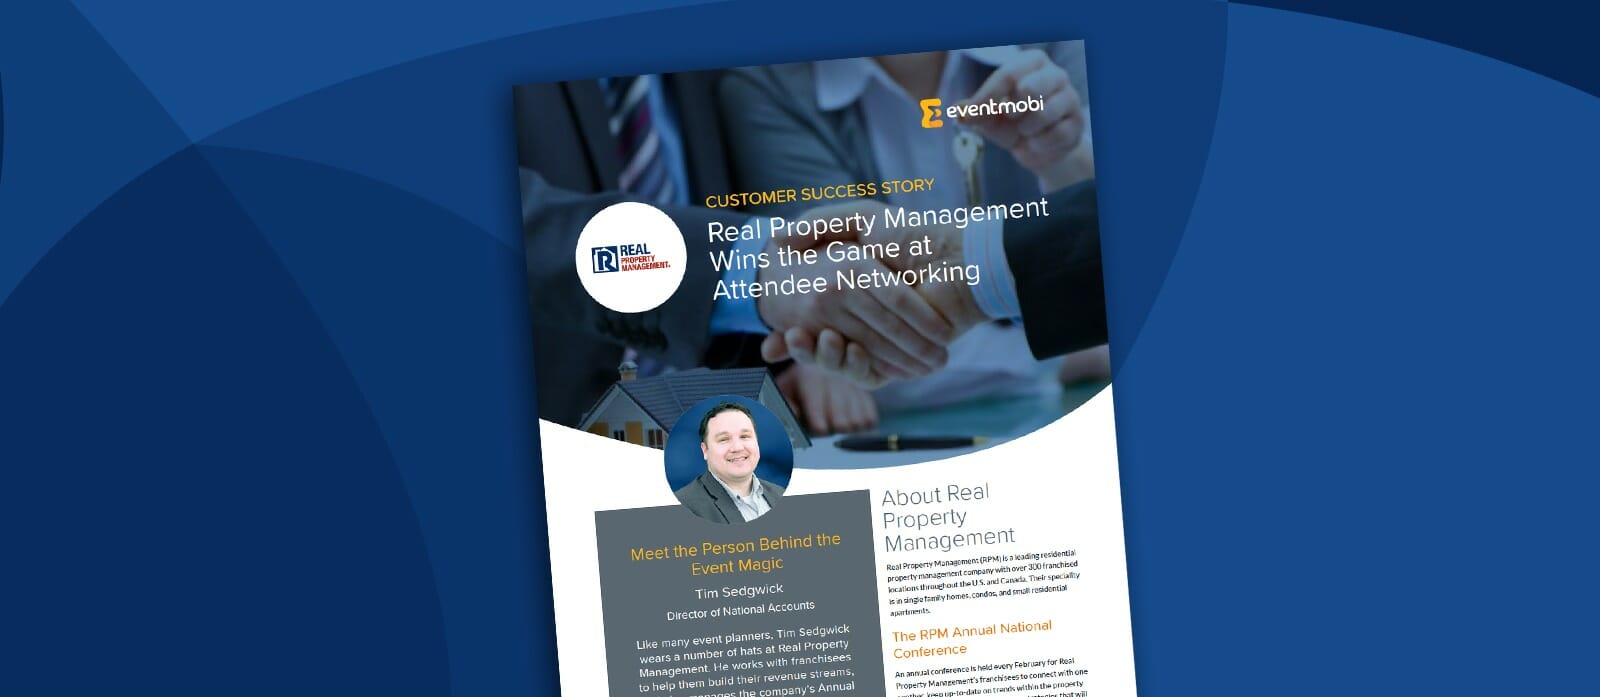 Customer Success Story: Real Property Management Wins the Game at Attendee Networking